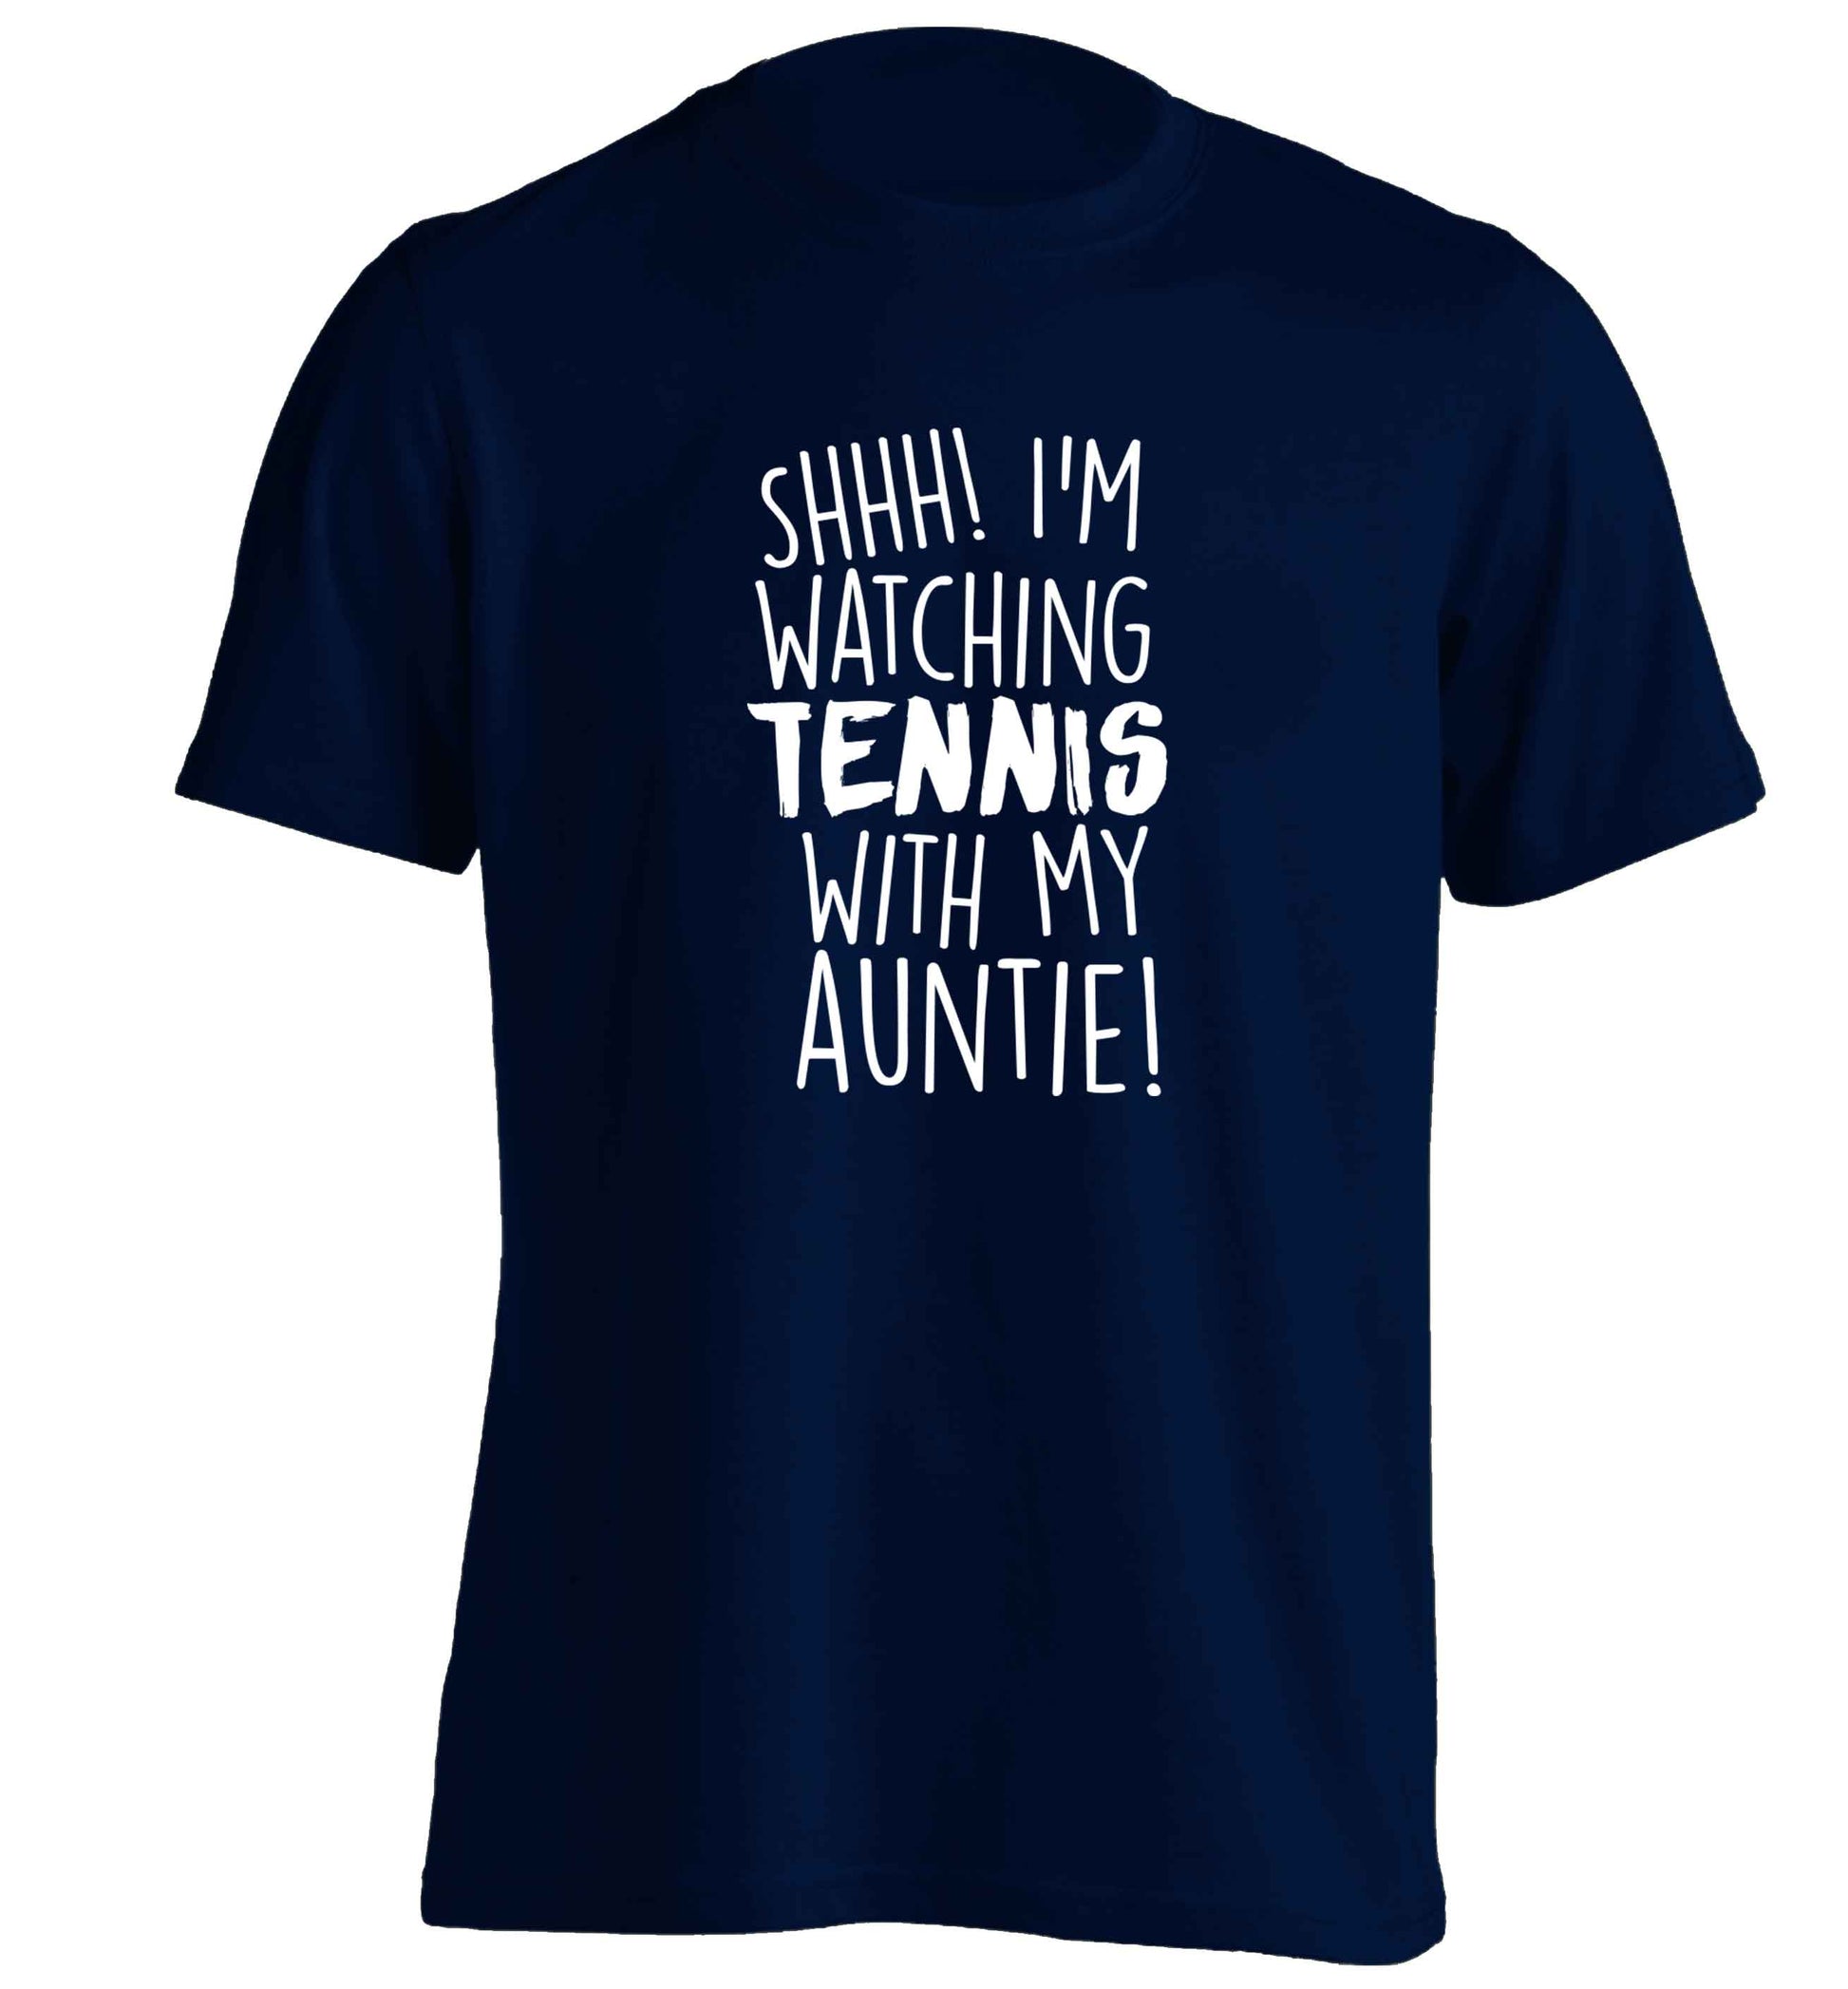 Shh! I'm watching tennis with my auntie! adults unisex navy Tshirt 2XL